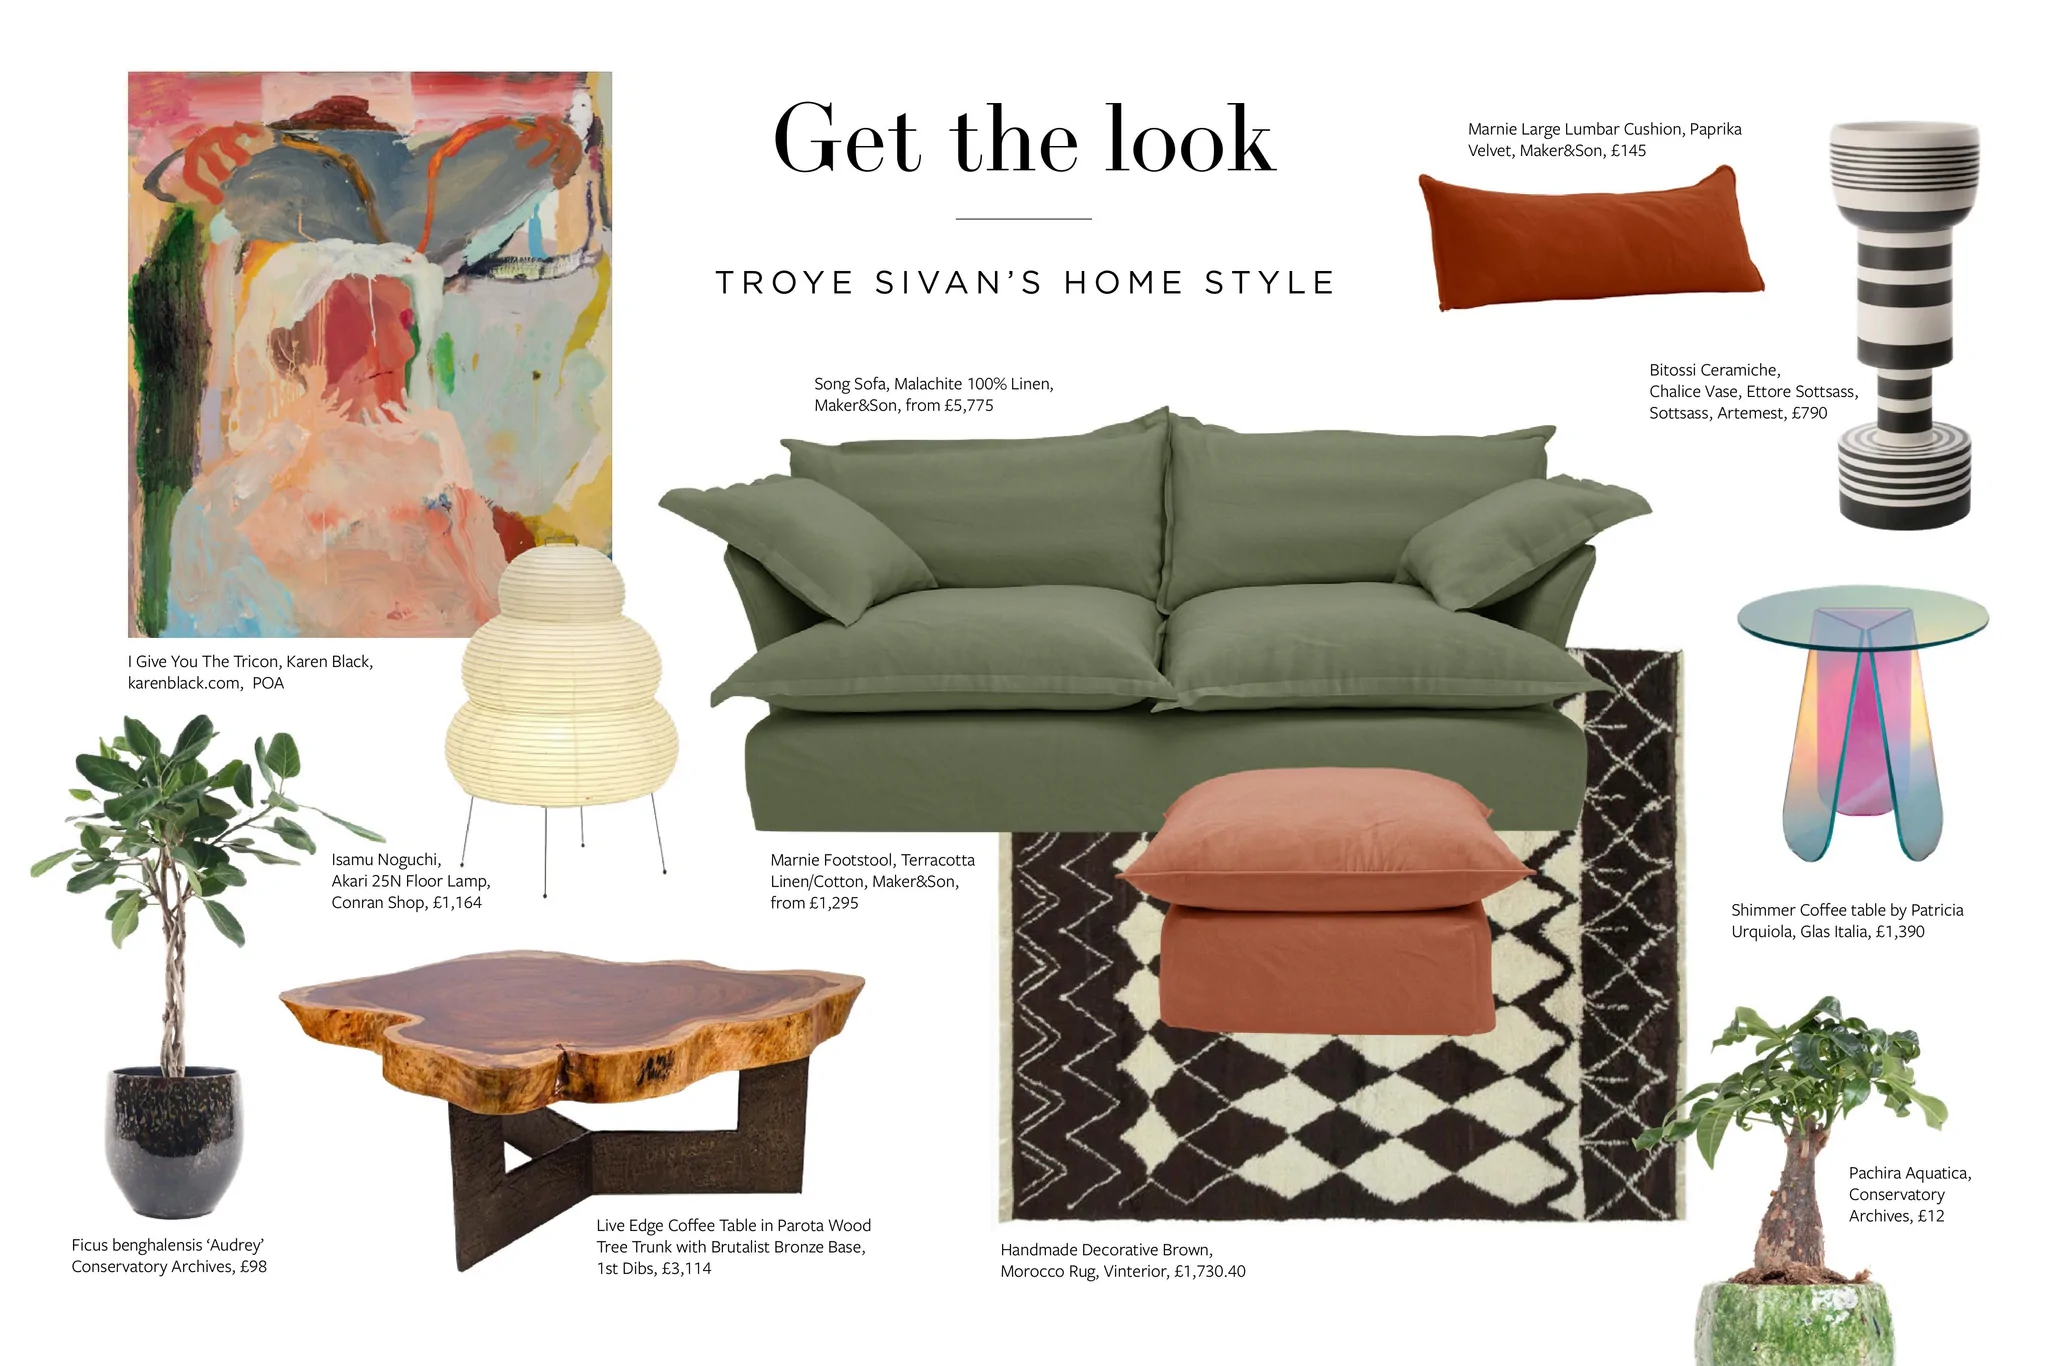 Architectural Digests get the look selection for Troye Sivans house featuring Malachite green linen song pillow edge Sofa by Maker and Son